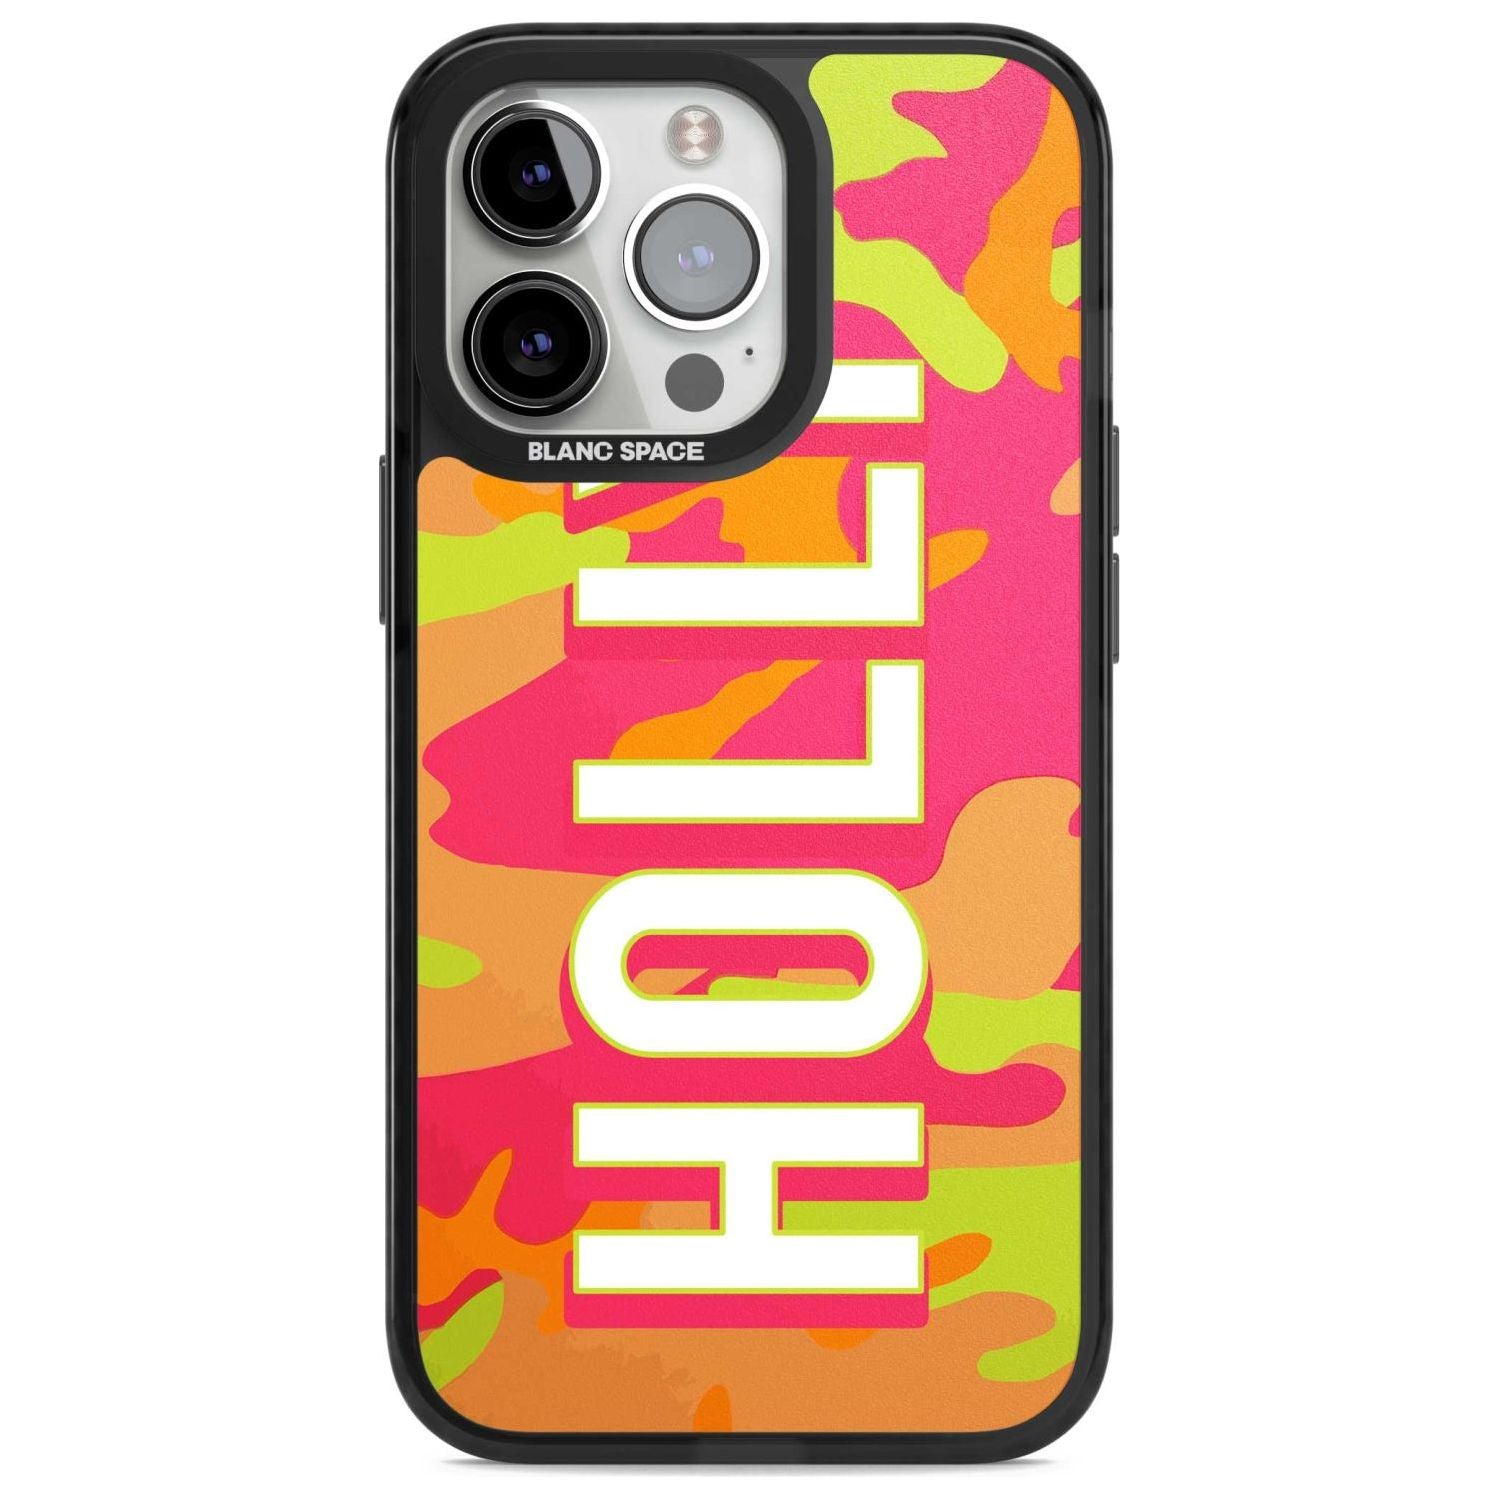 Personalised Colourful Neon Camo Custom Phone Case iPhone 15 Pro Max / Magsafe Black Impact Case,iPhone 15 Pro / Magsafe Black Impact Case,iPhone 14 Pro Max / Magsafe Black Impact Case,iPhone 14 Pro / Magsafe Black Impact Case,iPhone 13 Pro / Magsafe Black Impact Case Blanc Space